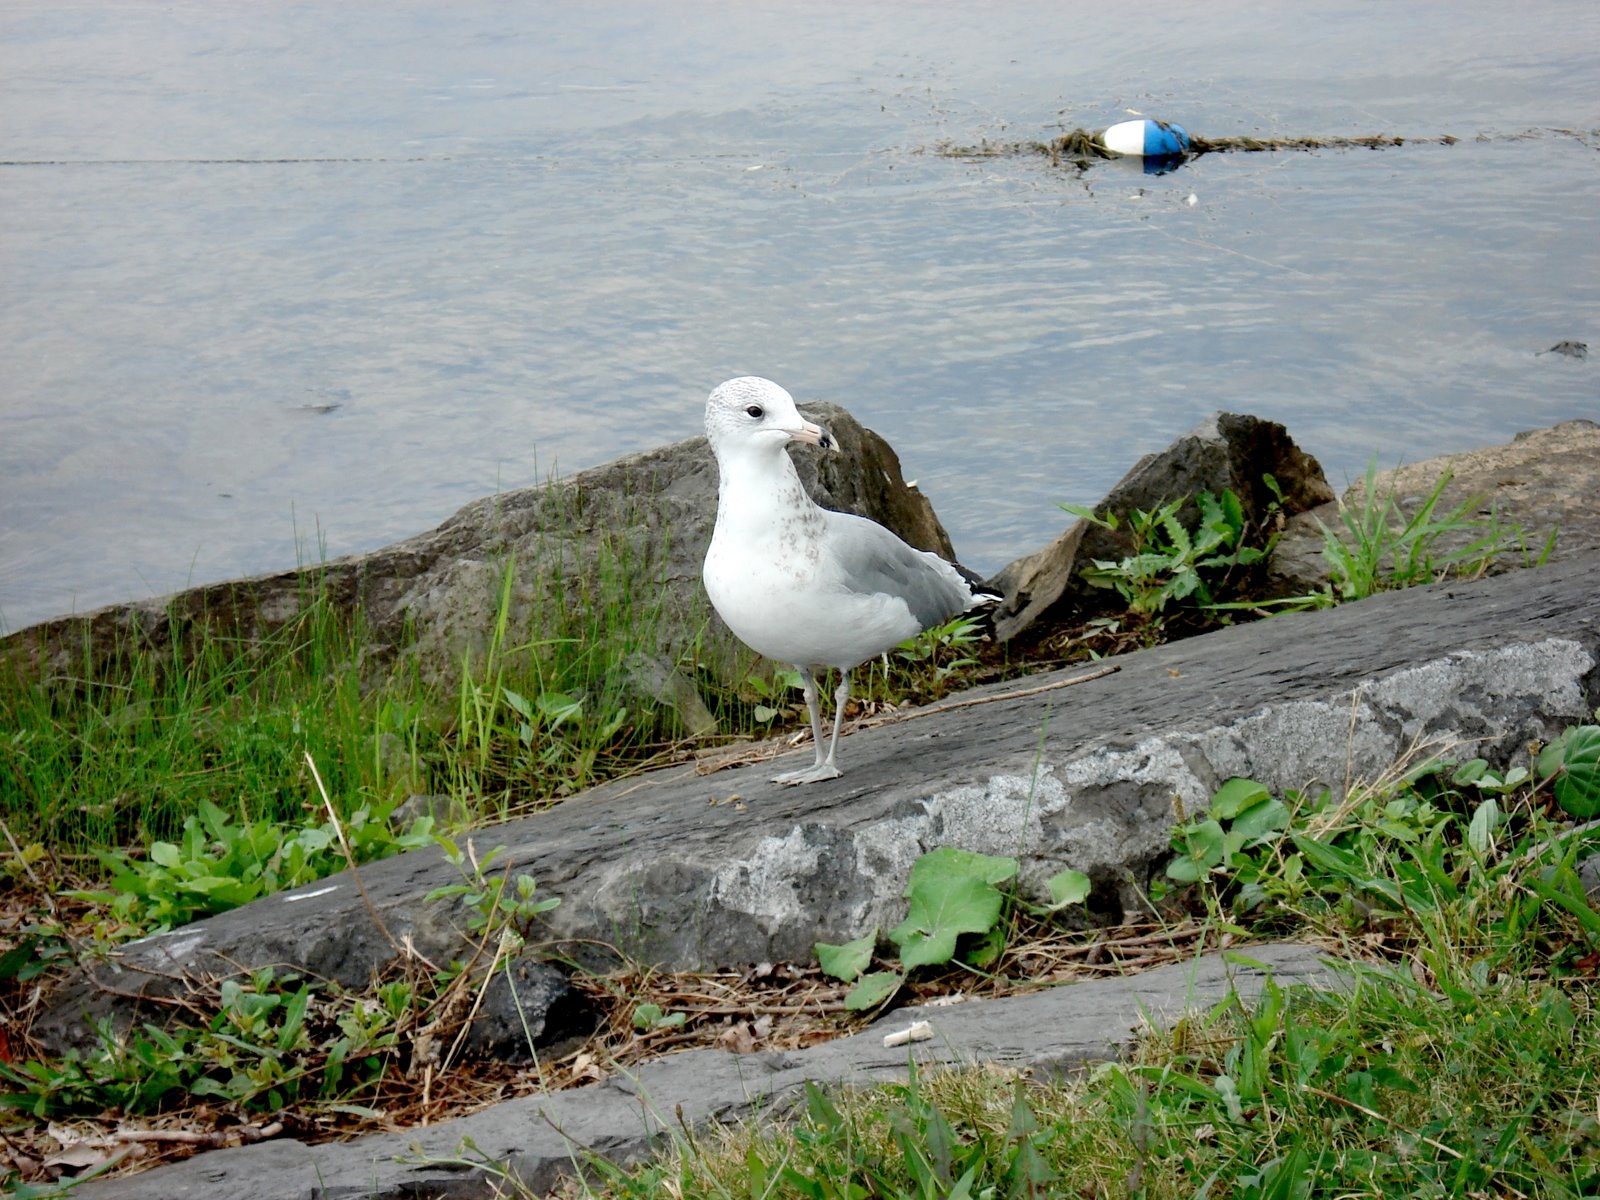 the seagull is standing next to the ocean shore